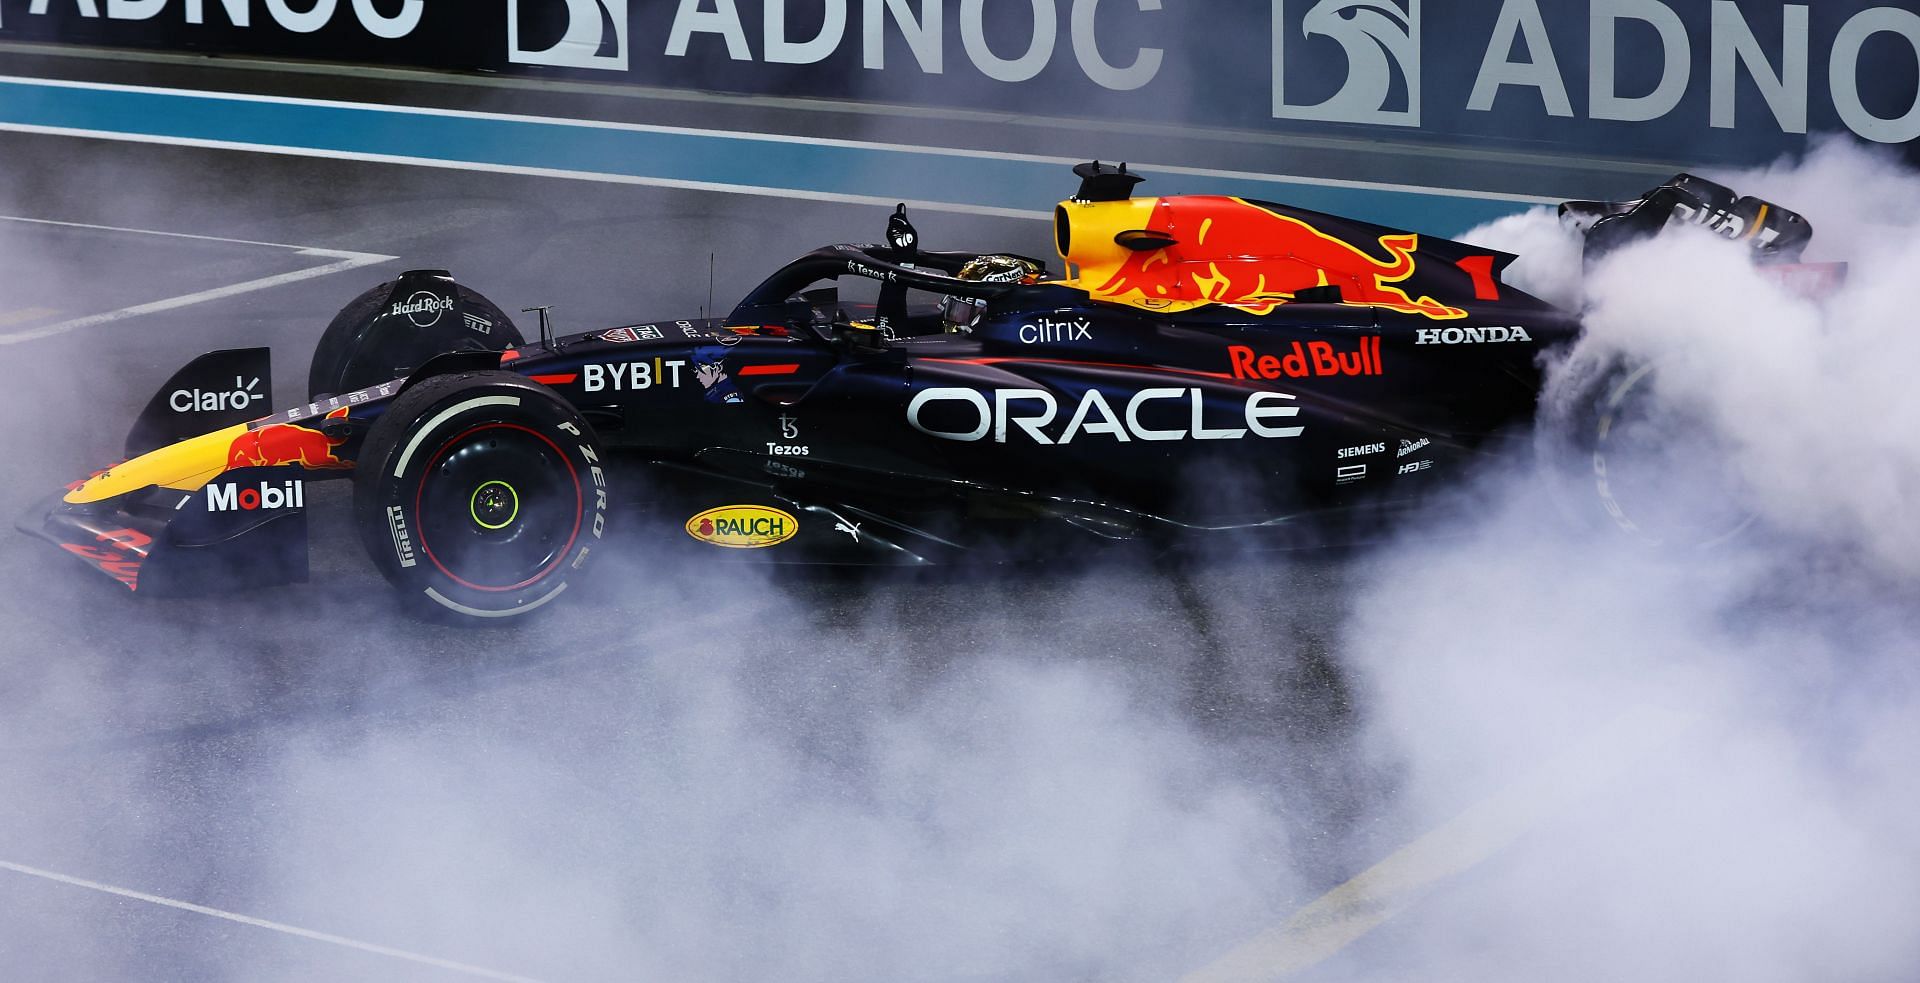 NEW] Red Bull Racing Make It A Double 2021-2022 Driver's World